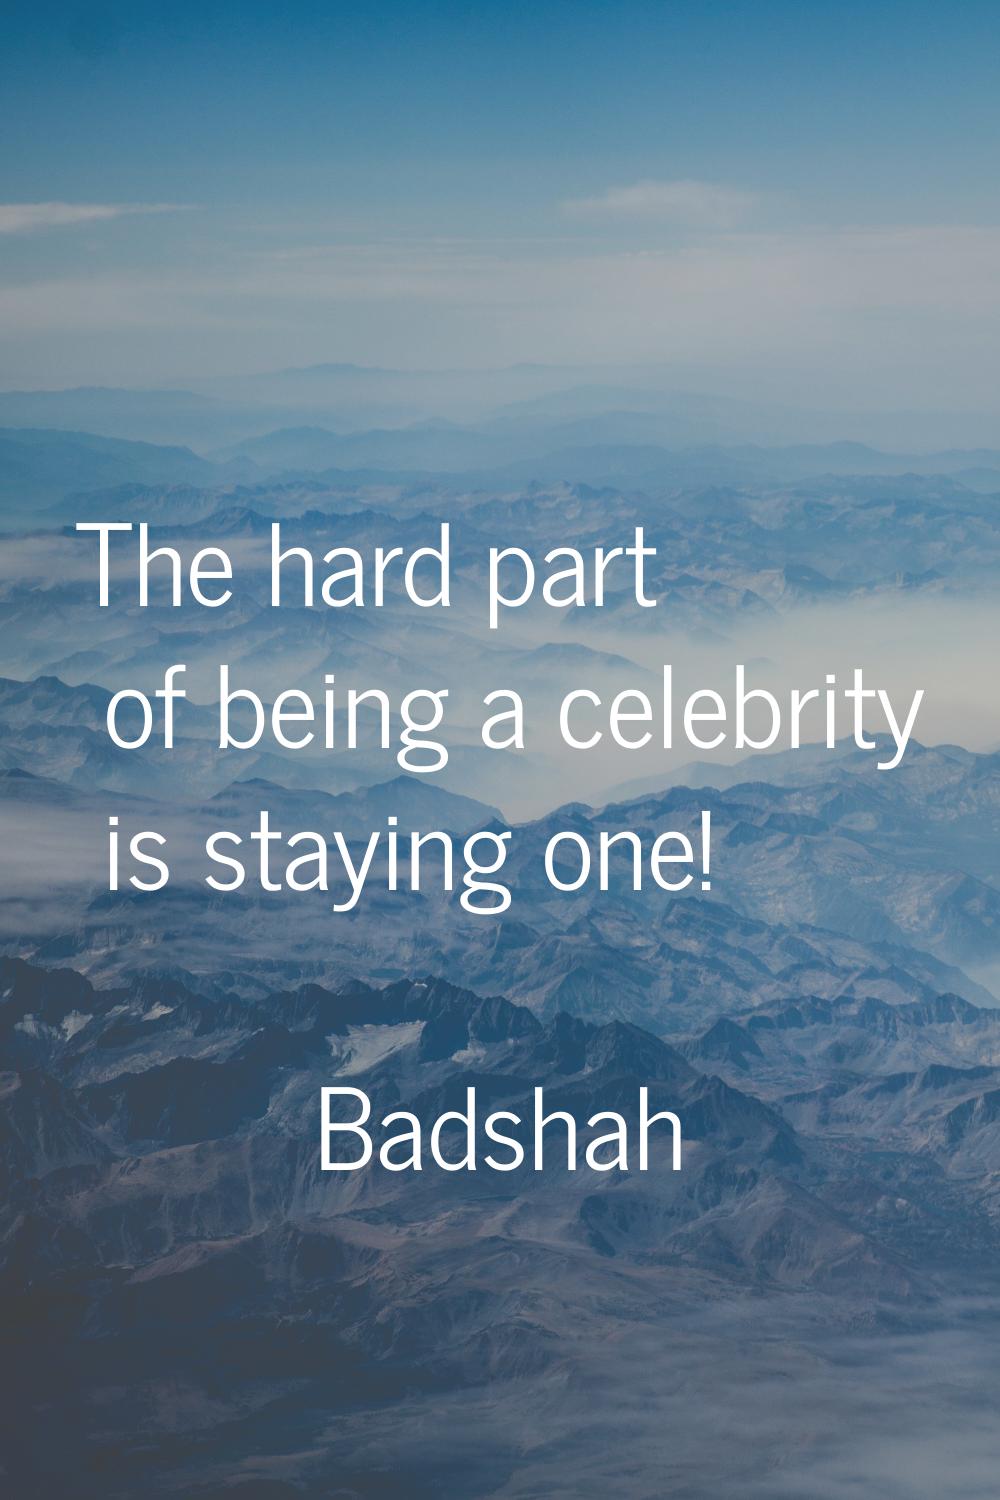 The hard part of being a celebrity is staying one!